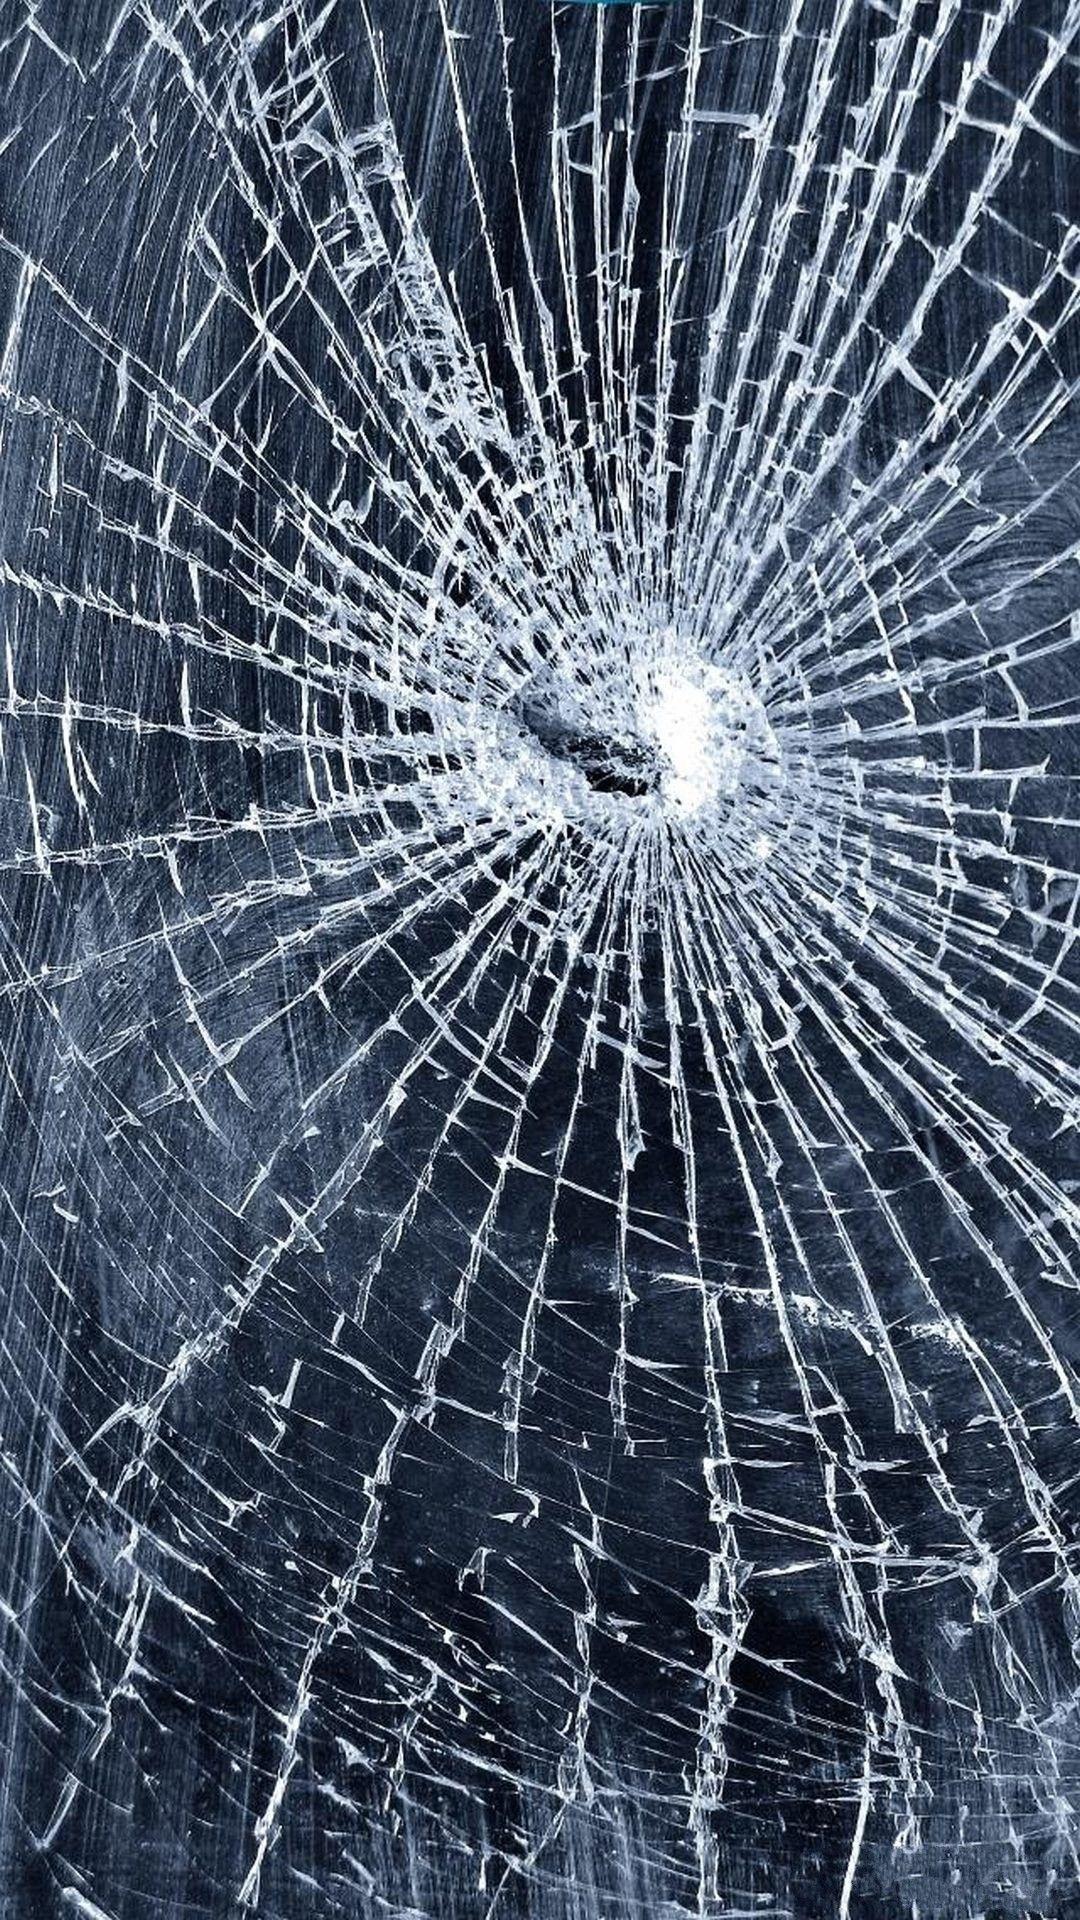 Top Cracked Screen Wallpaper Android FULL HD 1080p For PC Background. Broken screen wallpaper, Screen wallpaper, Broken glass wallpaper